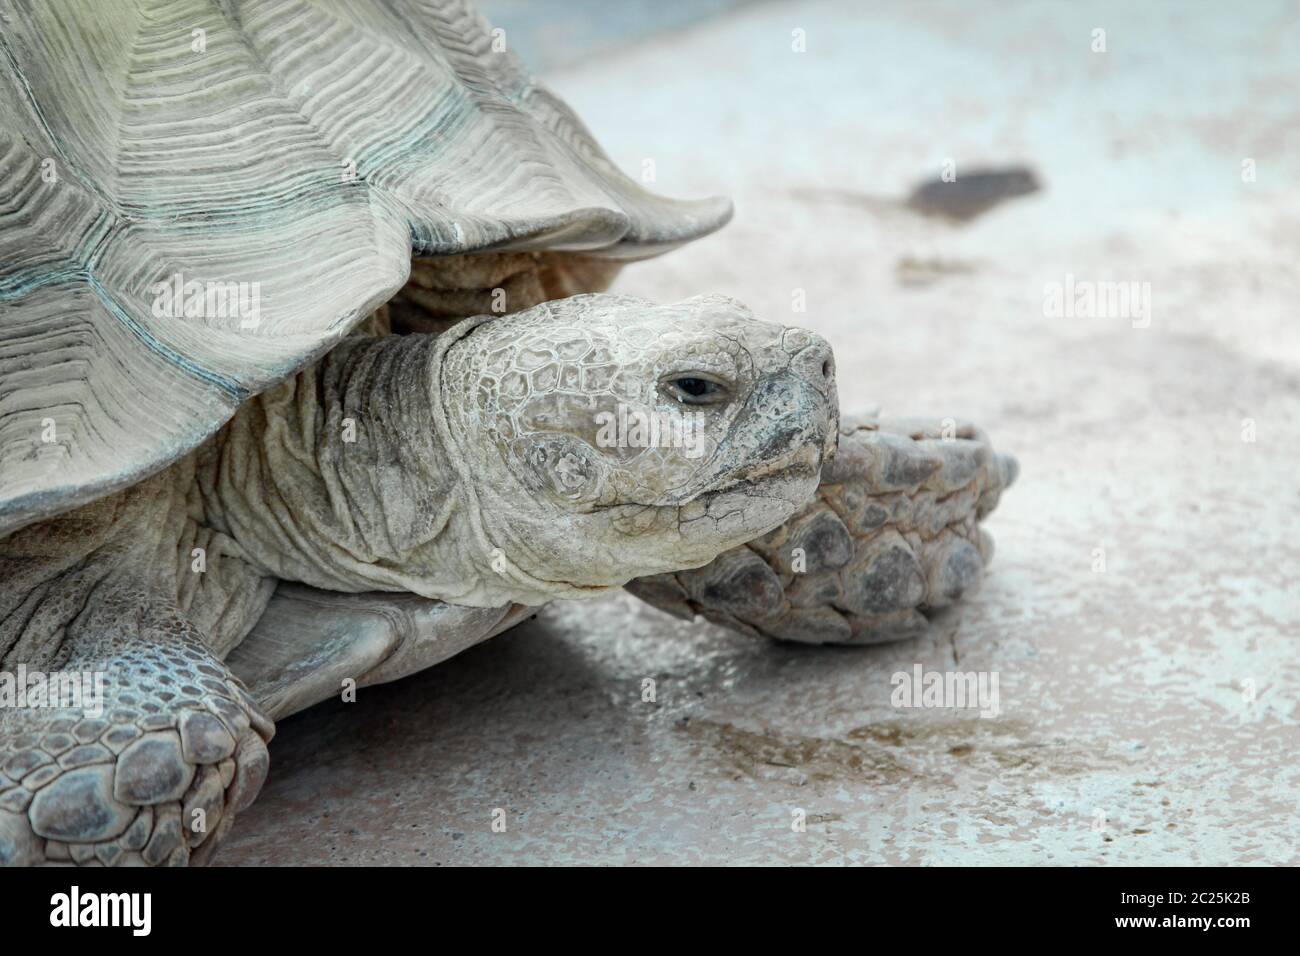 close up, details of turtle, turtles Stock Photo